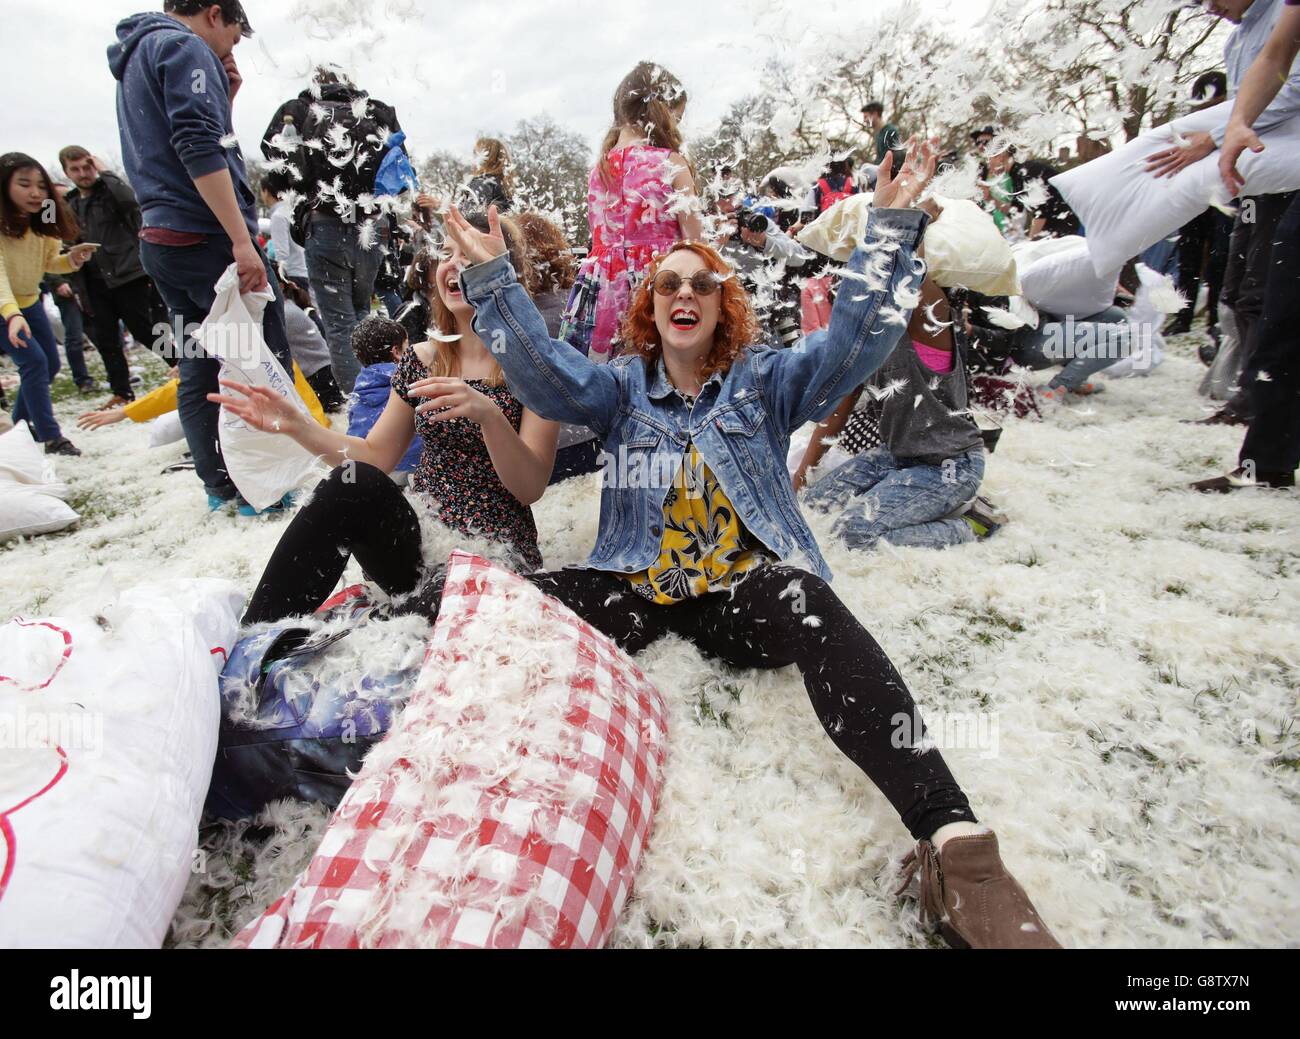 People take part in a mass pillow fight in Kennington Park in London, to mark International Pillow Fight Day. Stock Photo